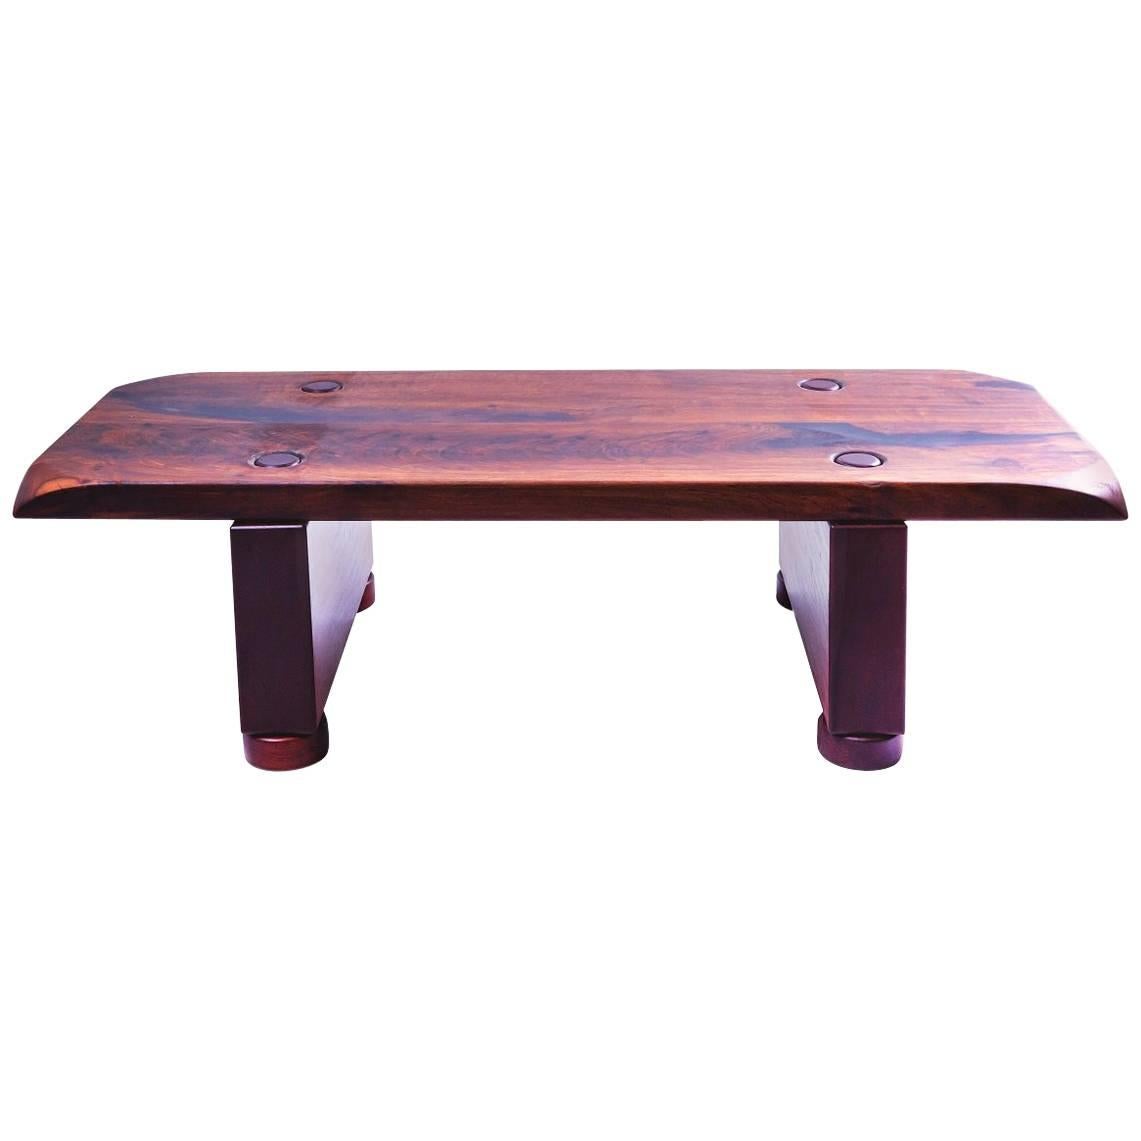 São Xico Double Side Reclaimed Wood Table, woodworking brazilian design For Sale